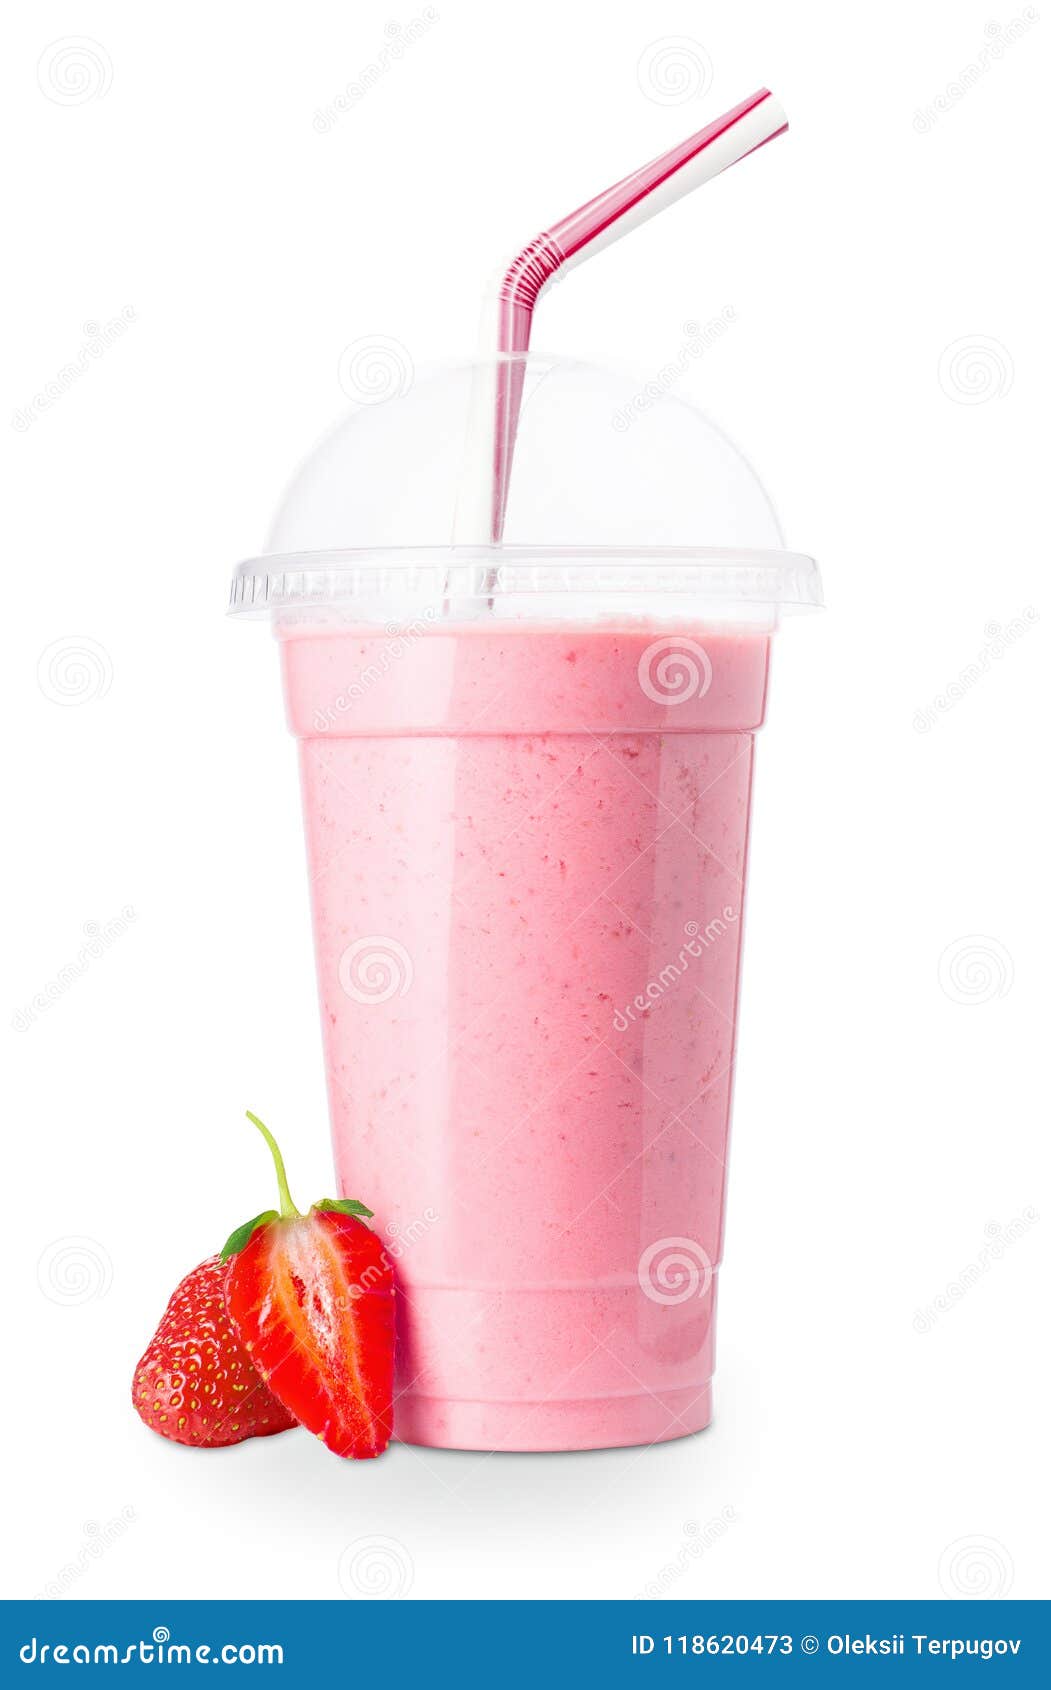 Berries Smoothie Cup with Straw - Free Download Images High Quality PNG, JPG